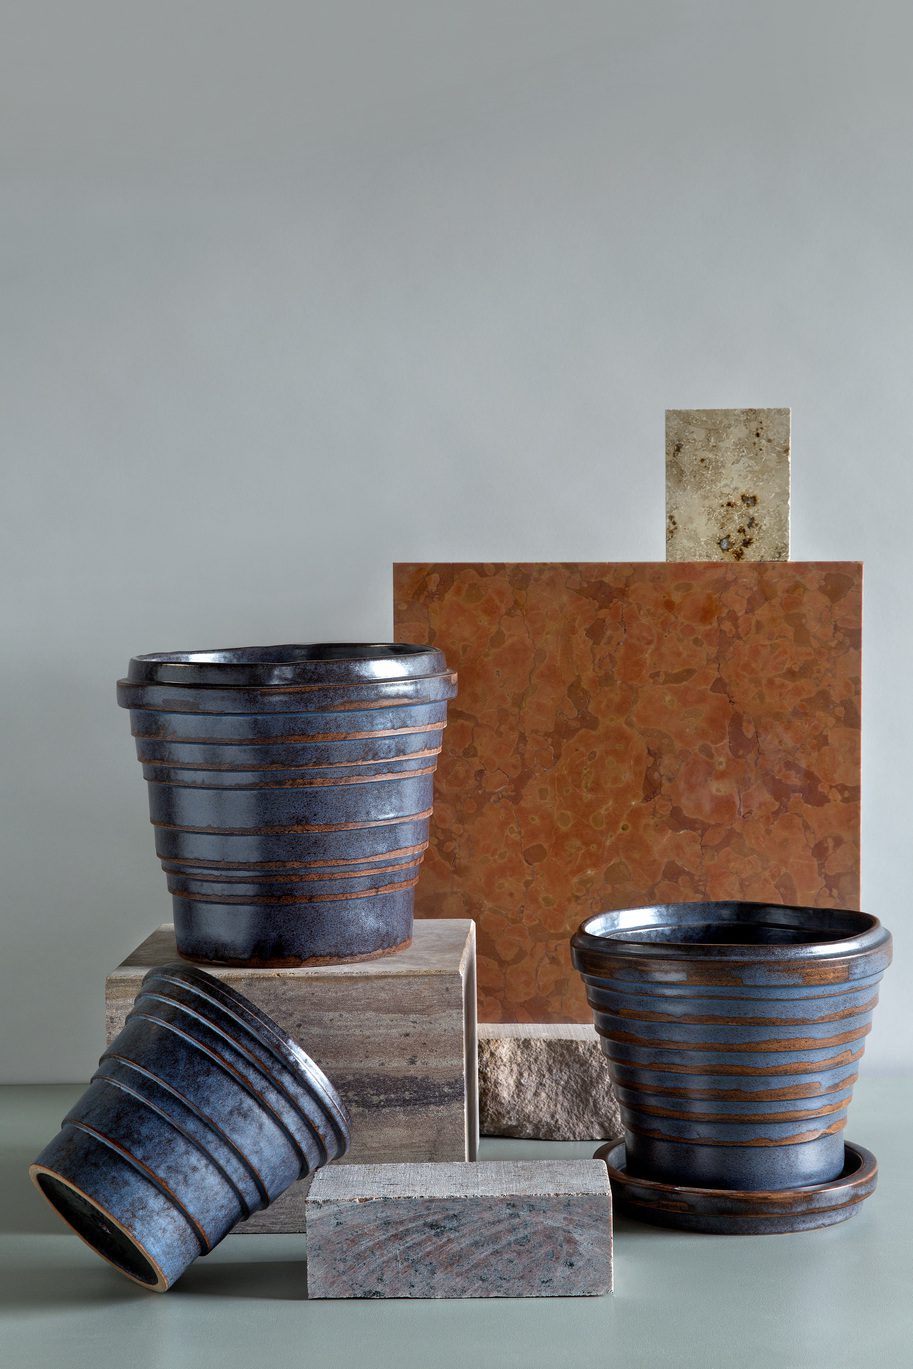 Blue-brown glazed pots organized with raw material.